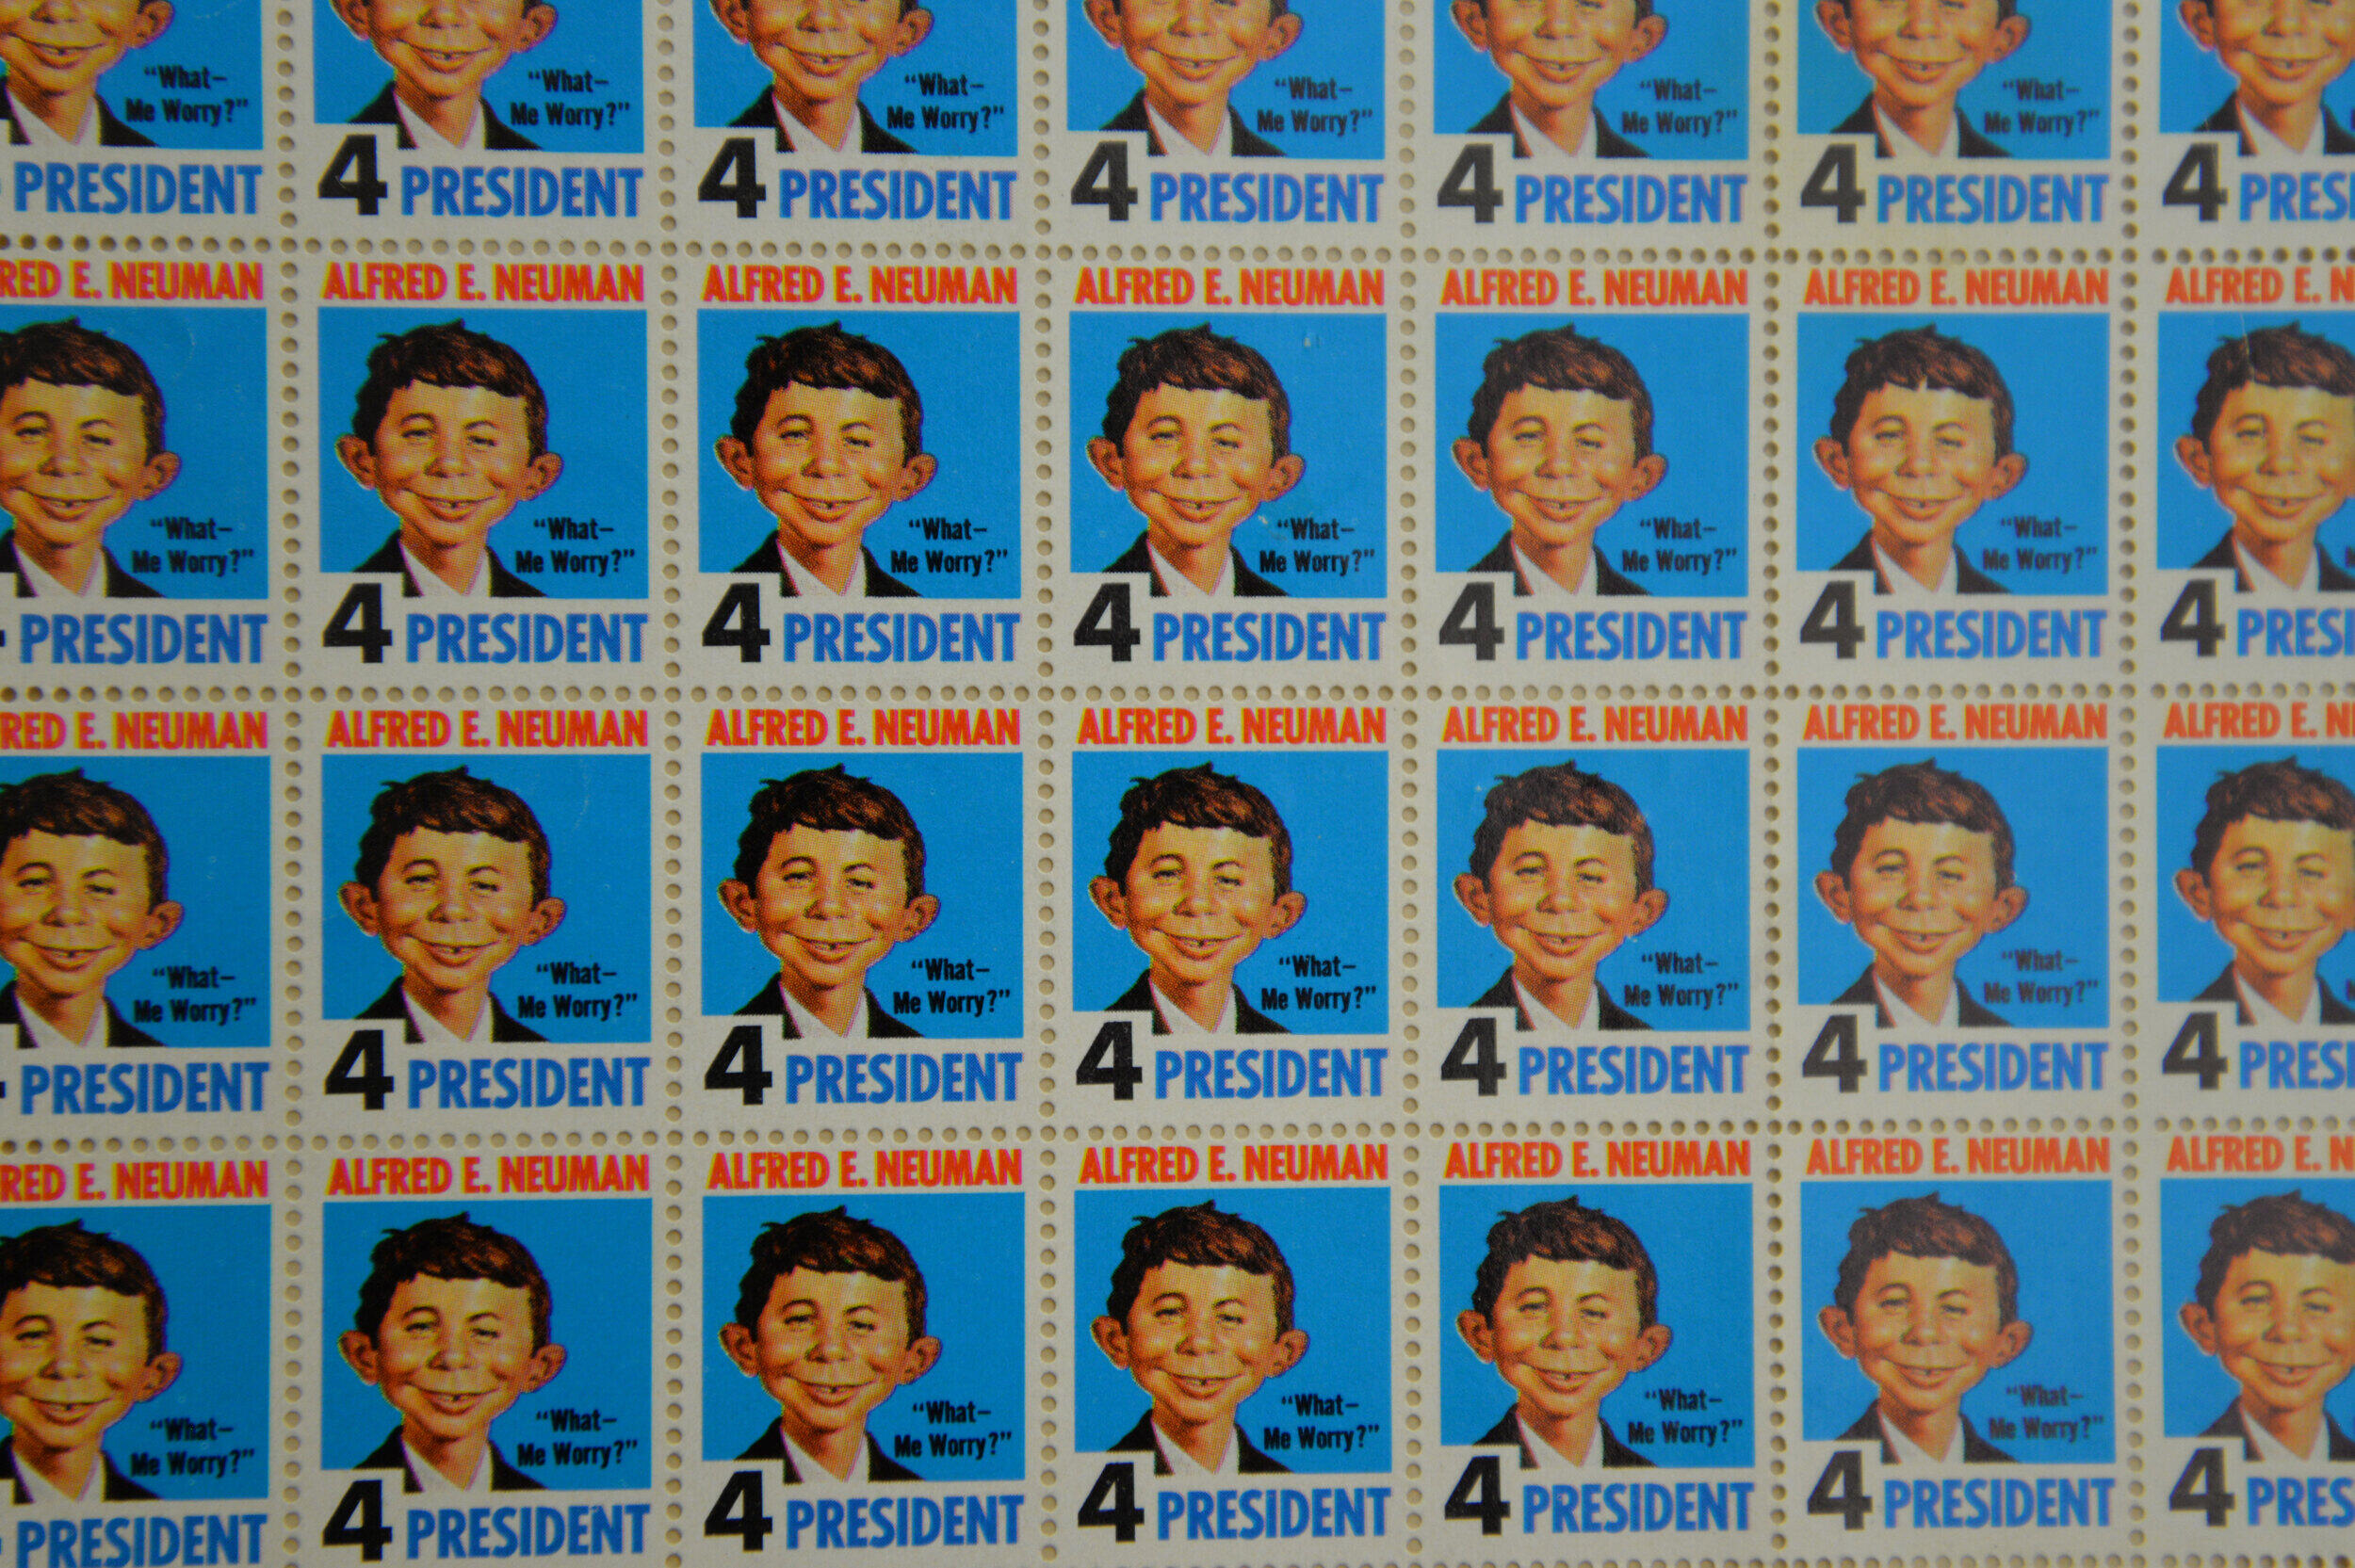 "Alfred E. Neuman 4 President" stamps